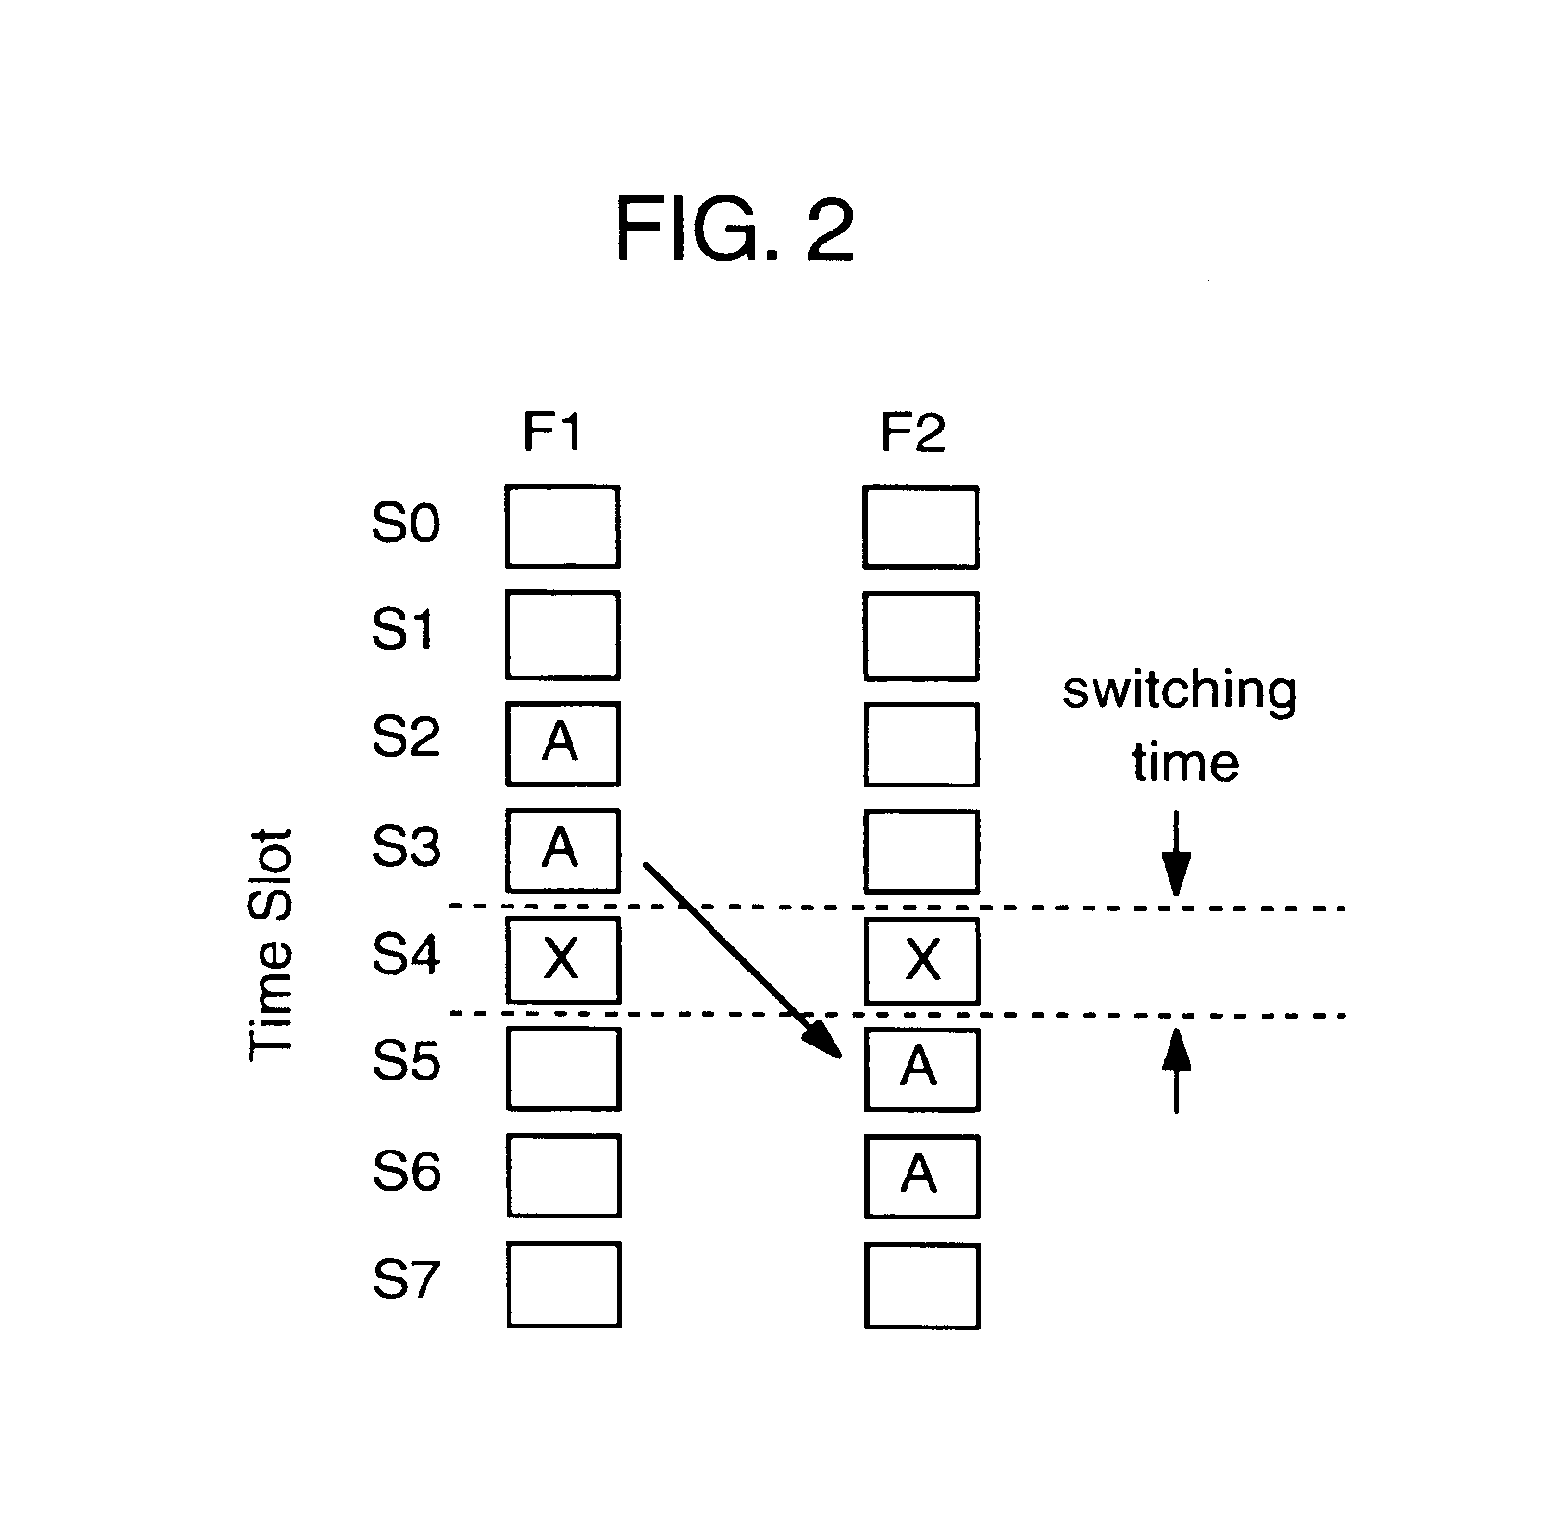 Dynamic resource allocation and media access control for a wireless ATM network